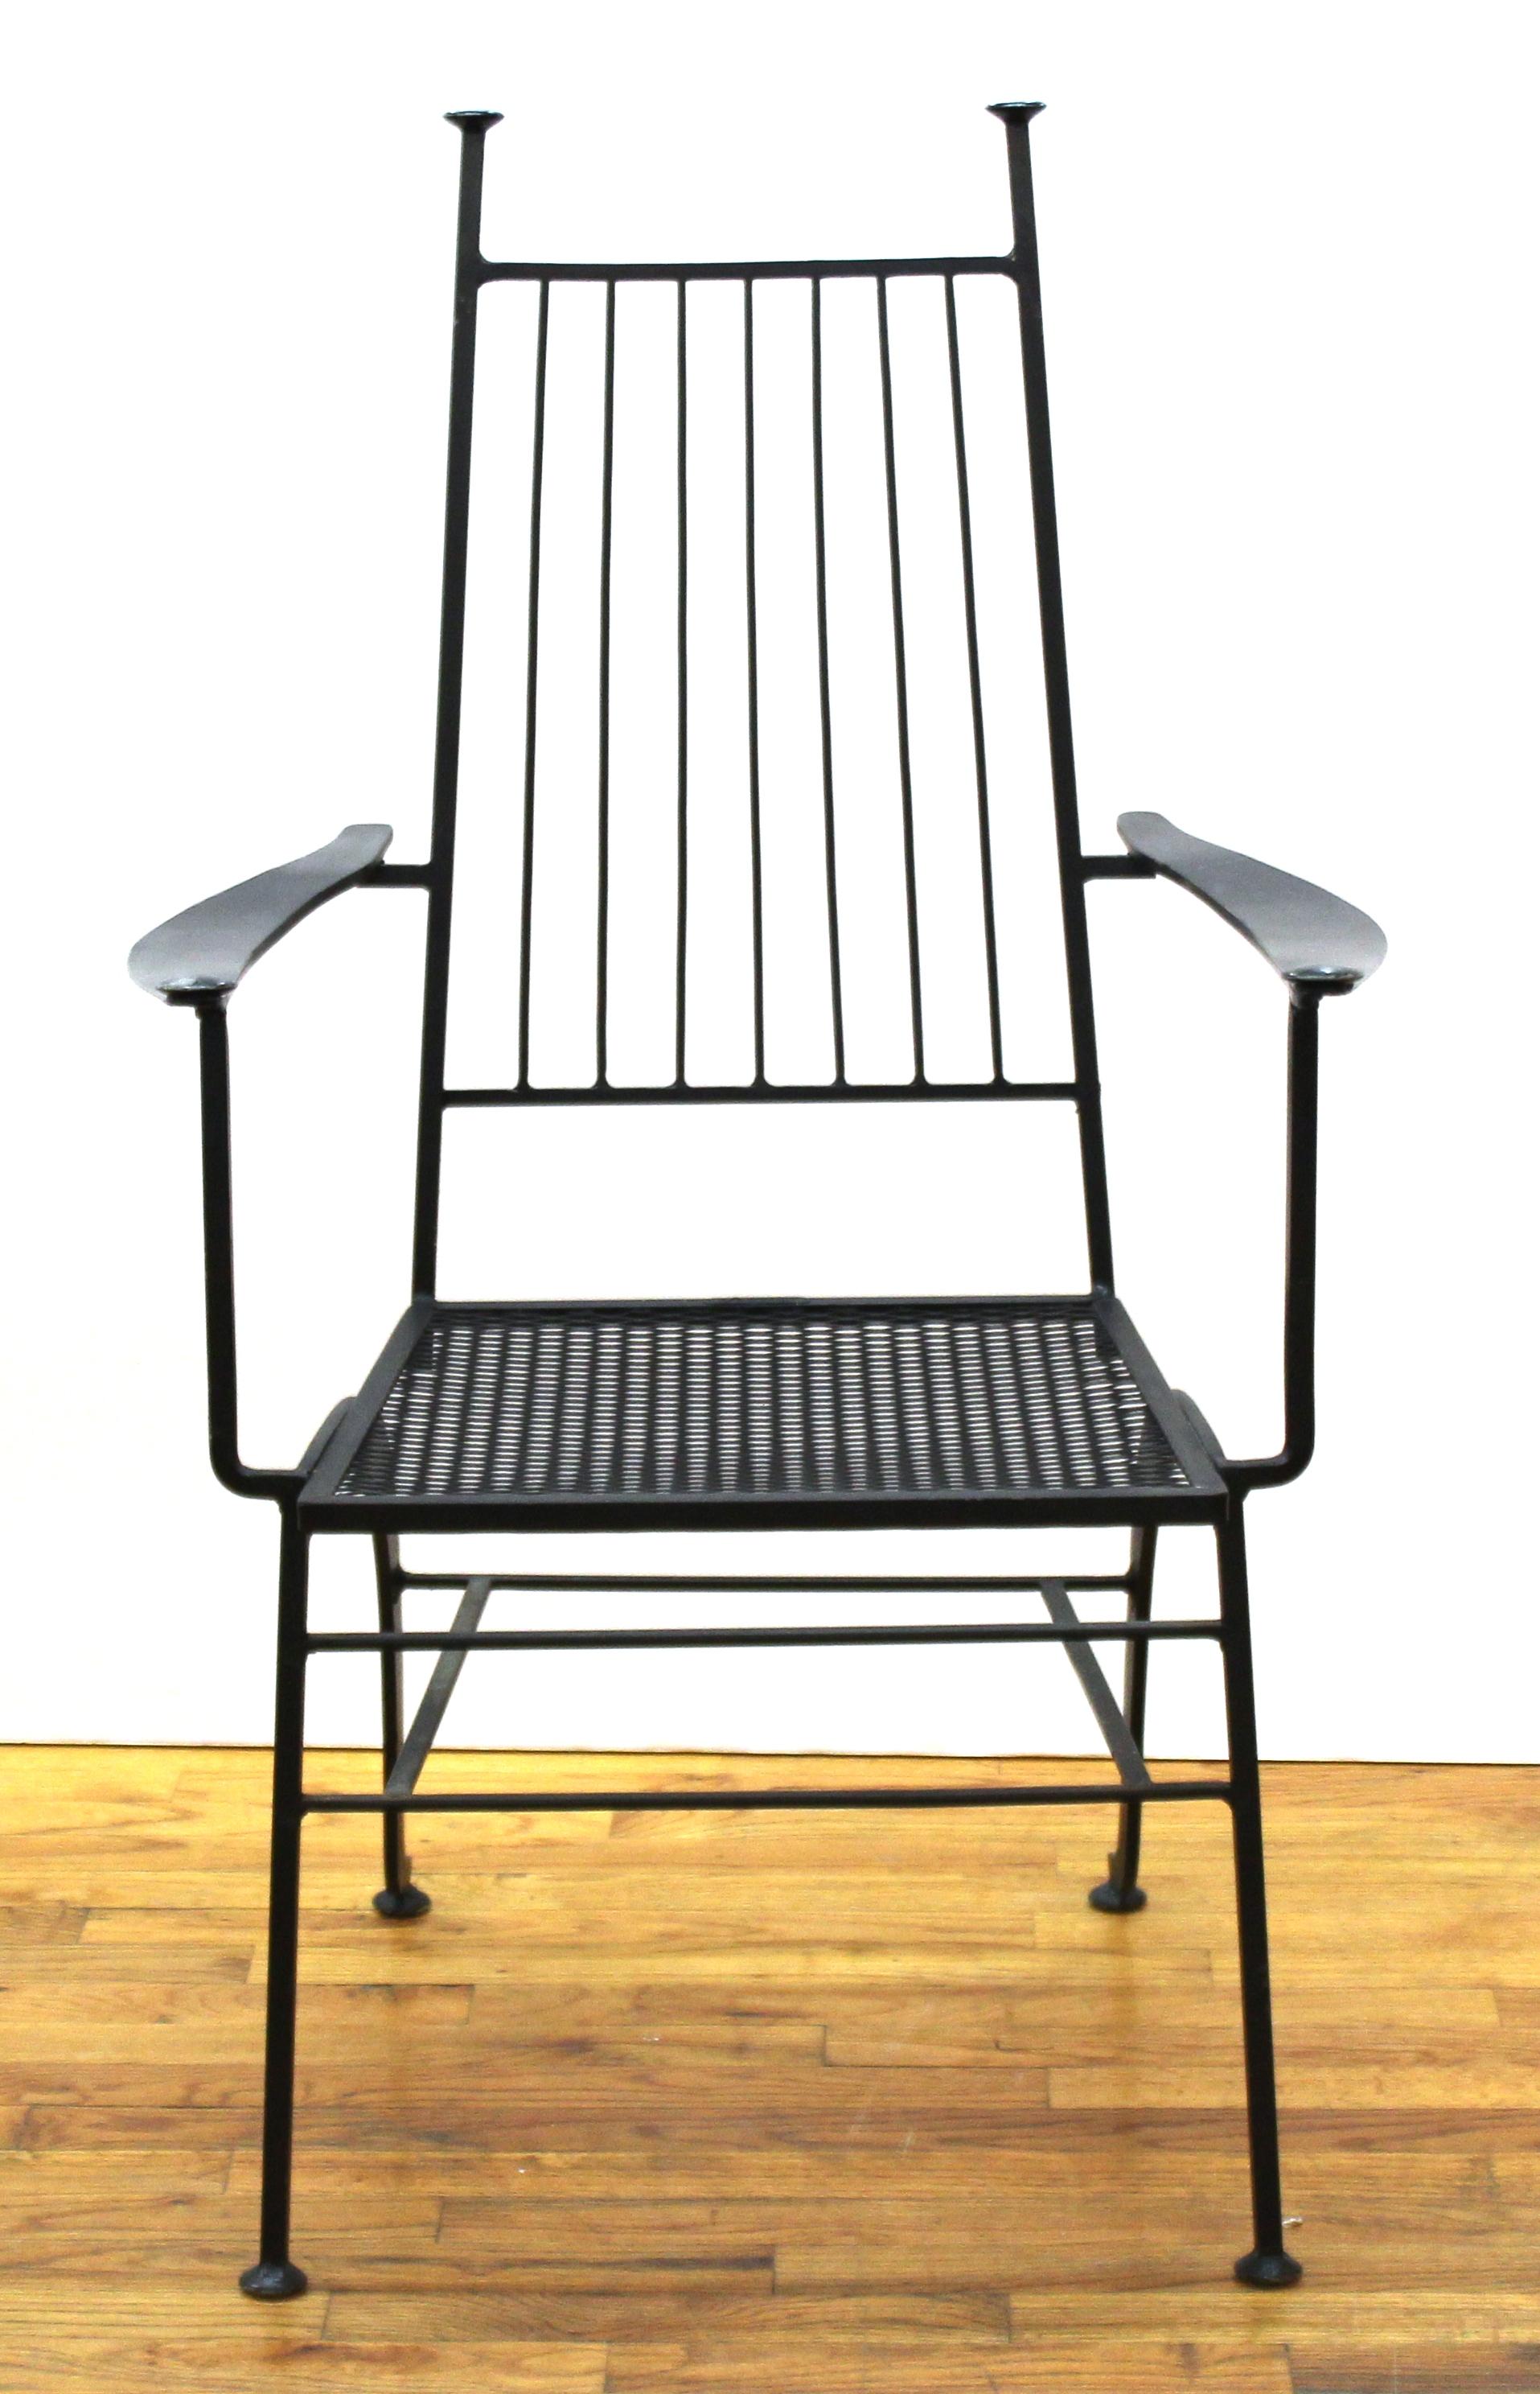 John Salterini for Russell Woodard Mid-Century Modern set of five iron patio chairs. The set comes with individual upholstered seat and back cushions. Makers mark on the back of the seat. In great vintage condition with age-appropriate wear and use.